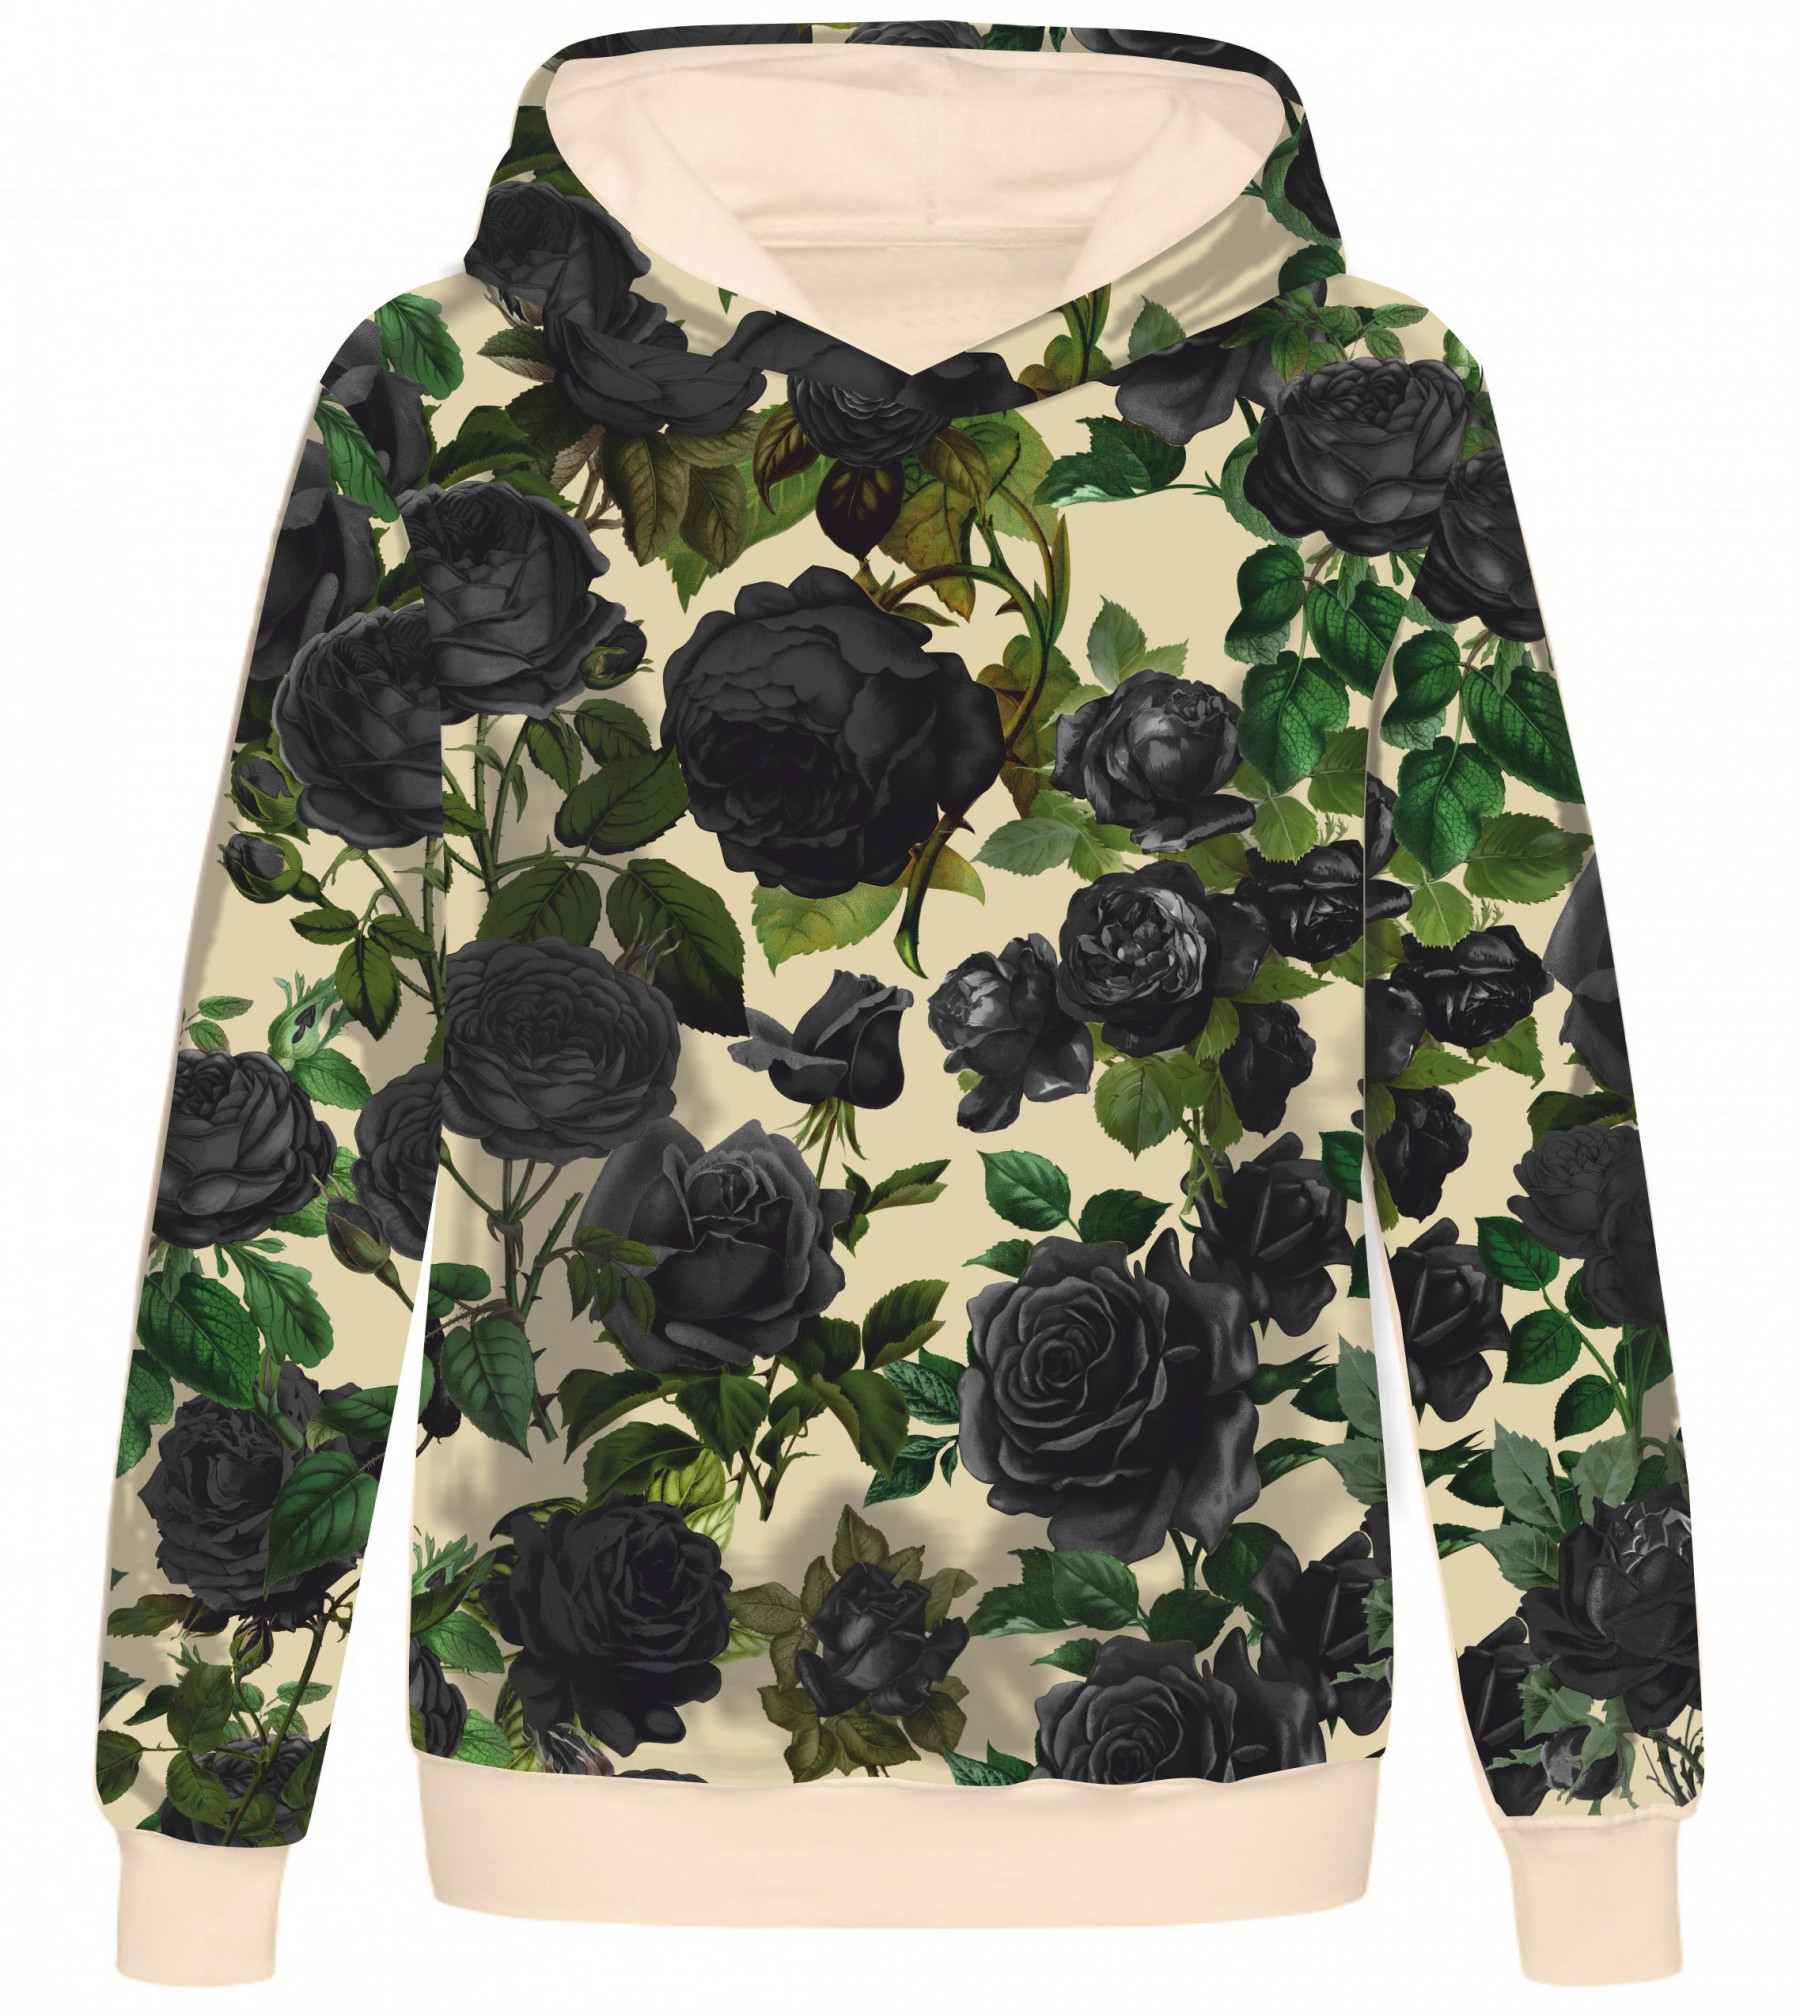 CLASSIC WOMEN’S HOODIE (POLA) - BLACK ROSES - looped knit fabric ITY